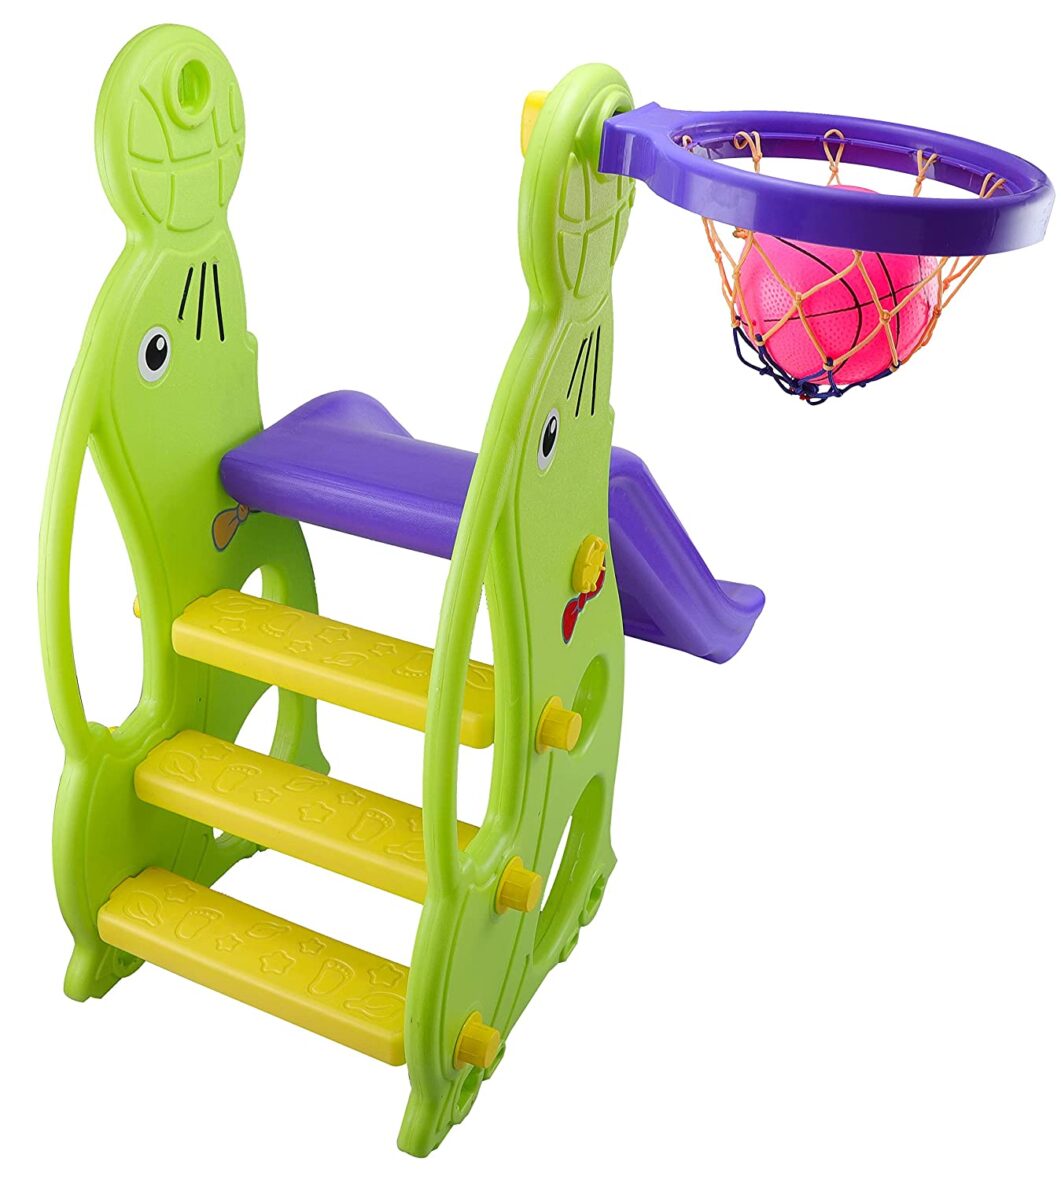 Dolphin Slide Along with One Basket Ball for Kids – Easy to Assemble and Use – Unbreakable Plastic – Indoor and Outdoor Use – Age 1 to 7 Years